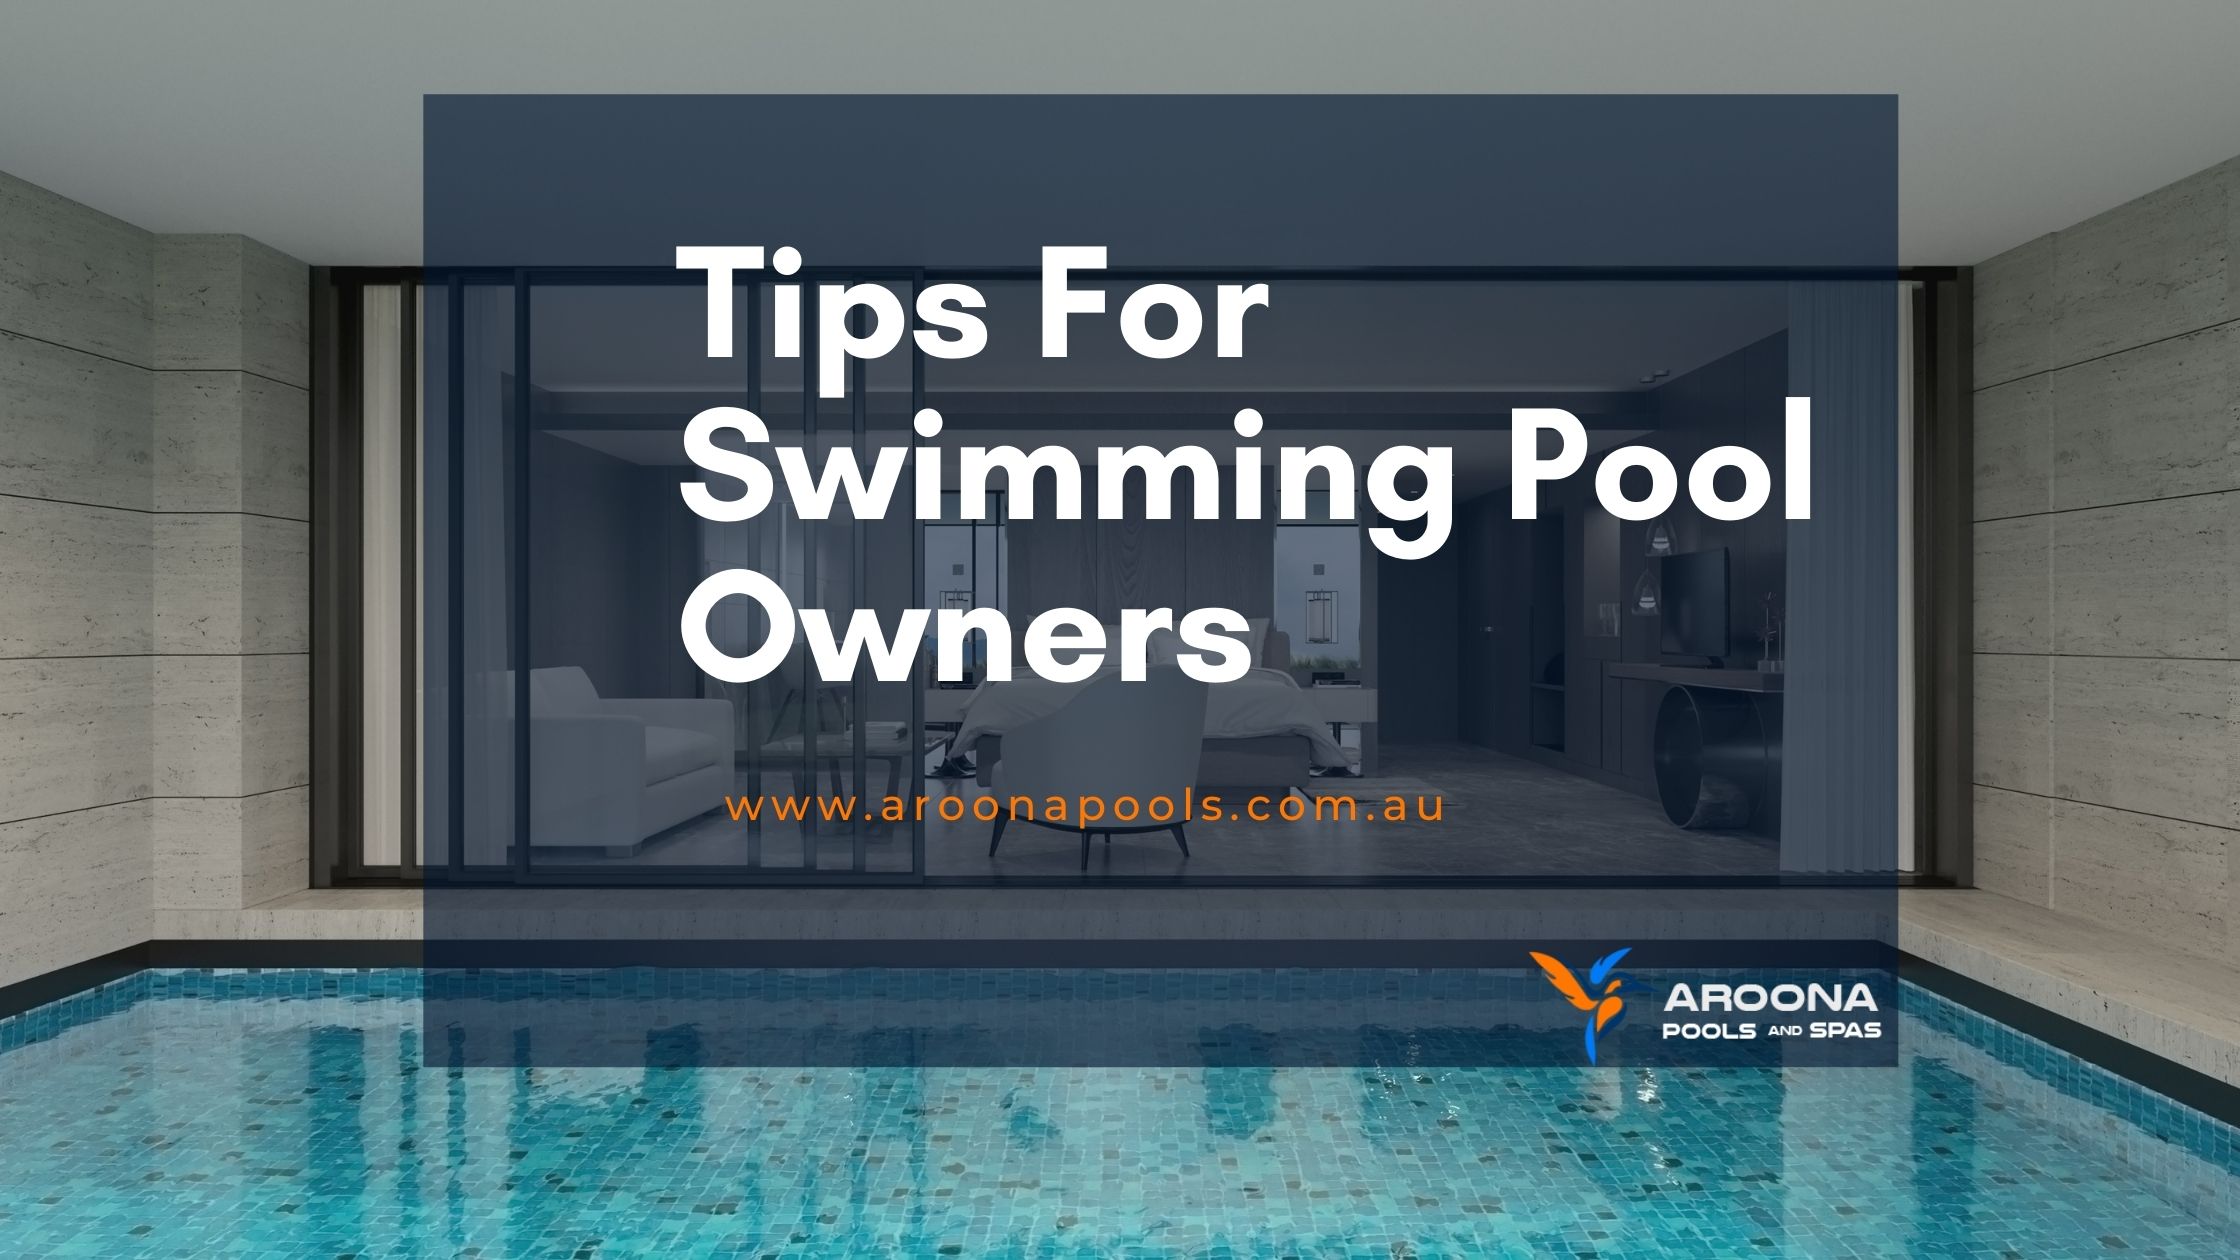 Tips For Swimming Pool Owners